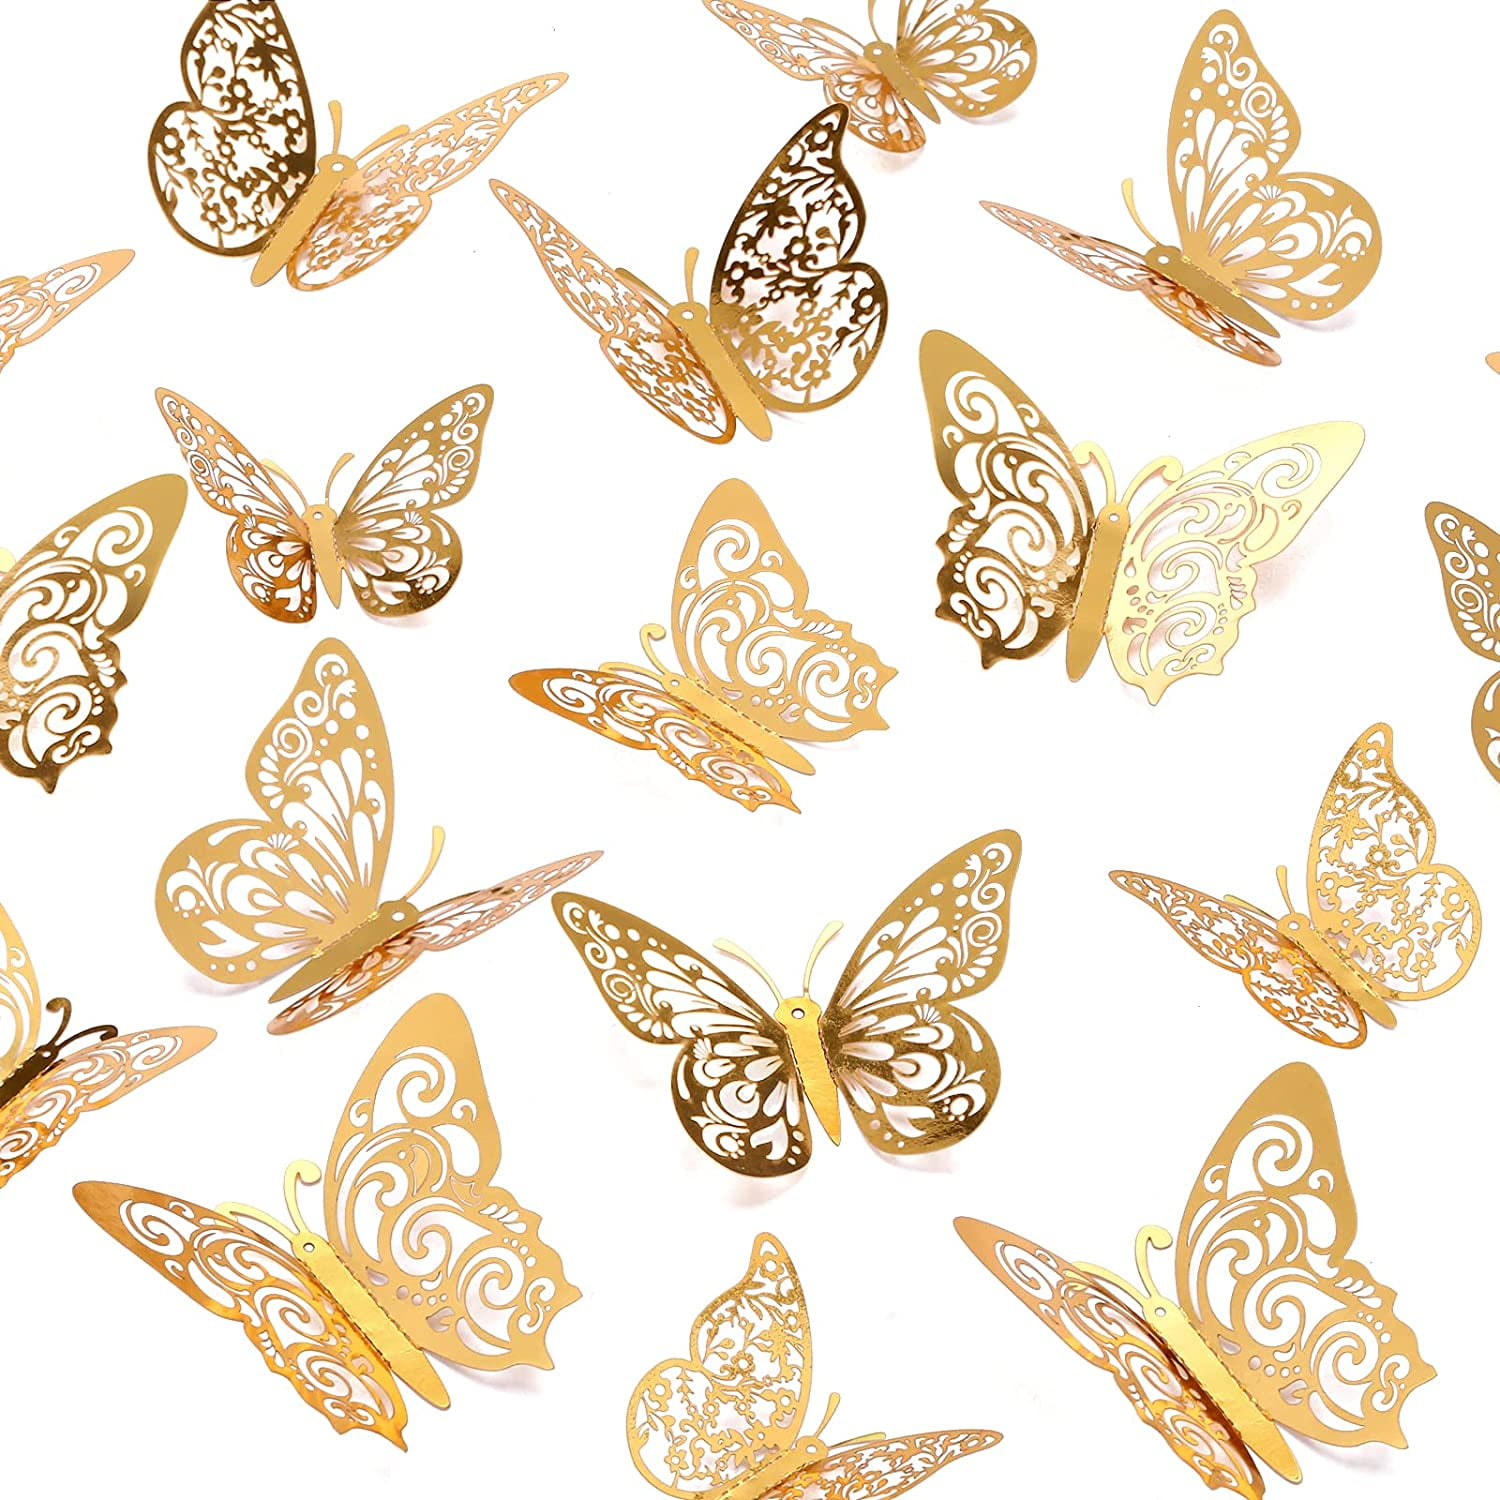 Gold Butterfly Wall Decals 3 Sizes Butterfly Stickers for Party Cake Decorations Girls Kids Baby Bedroom Bathroom Living Room Birthday Gold 48pcs Gold Butterfly Decorations 